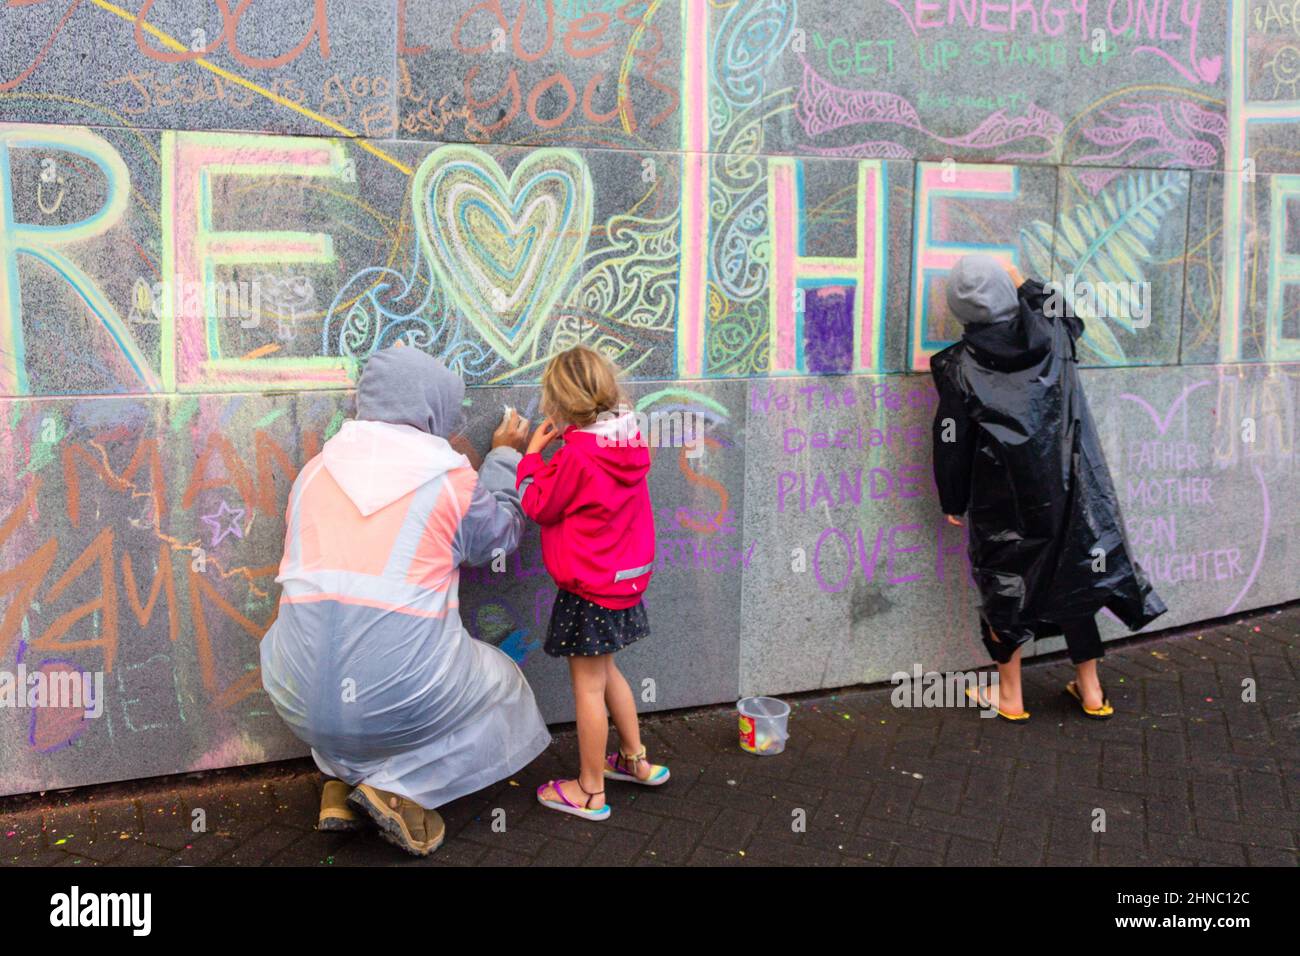 Wellington, New Zealand. February 13, 2022: Peaceful Protestors decorate the wall of the Beehive with messages about Freedom during the anti-mandate o Stock Photo